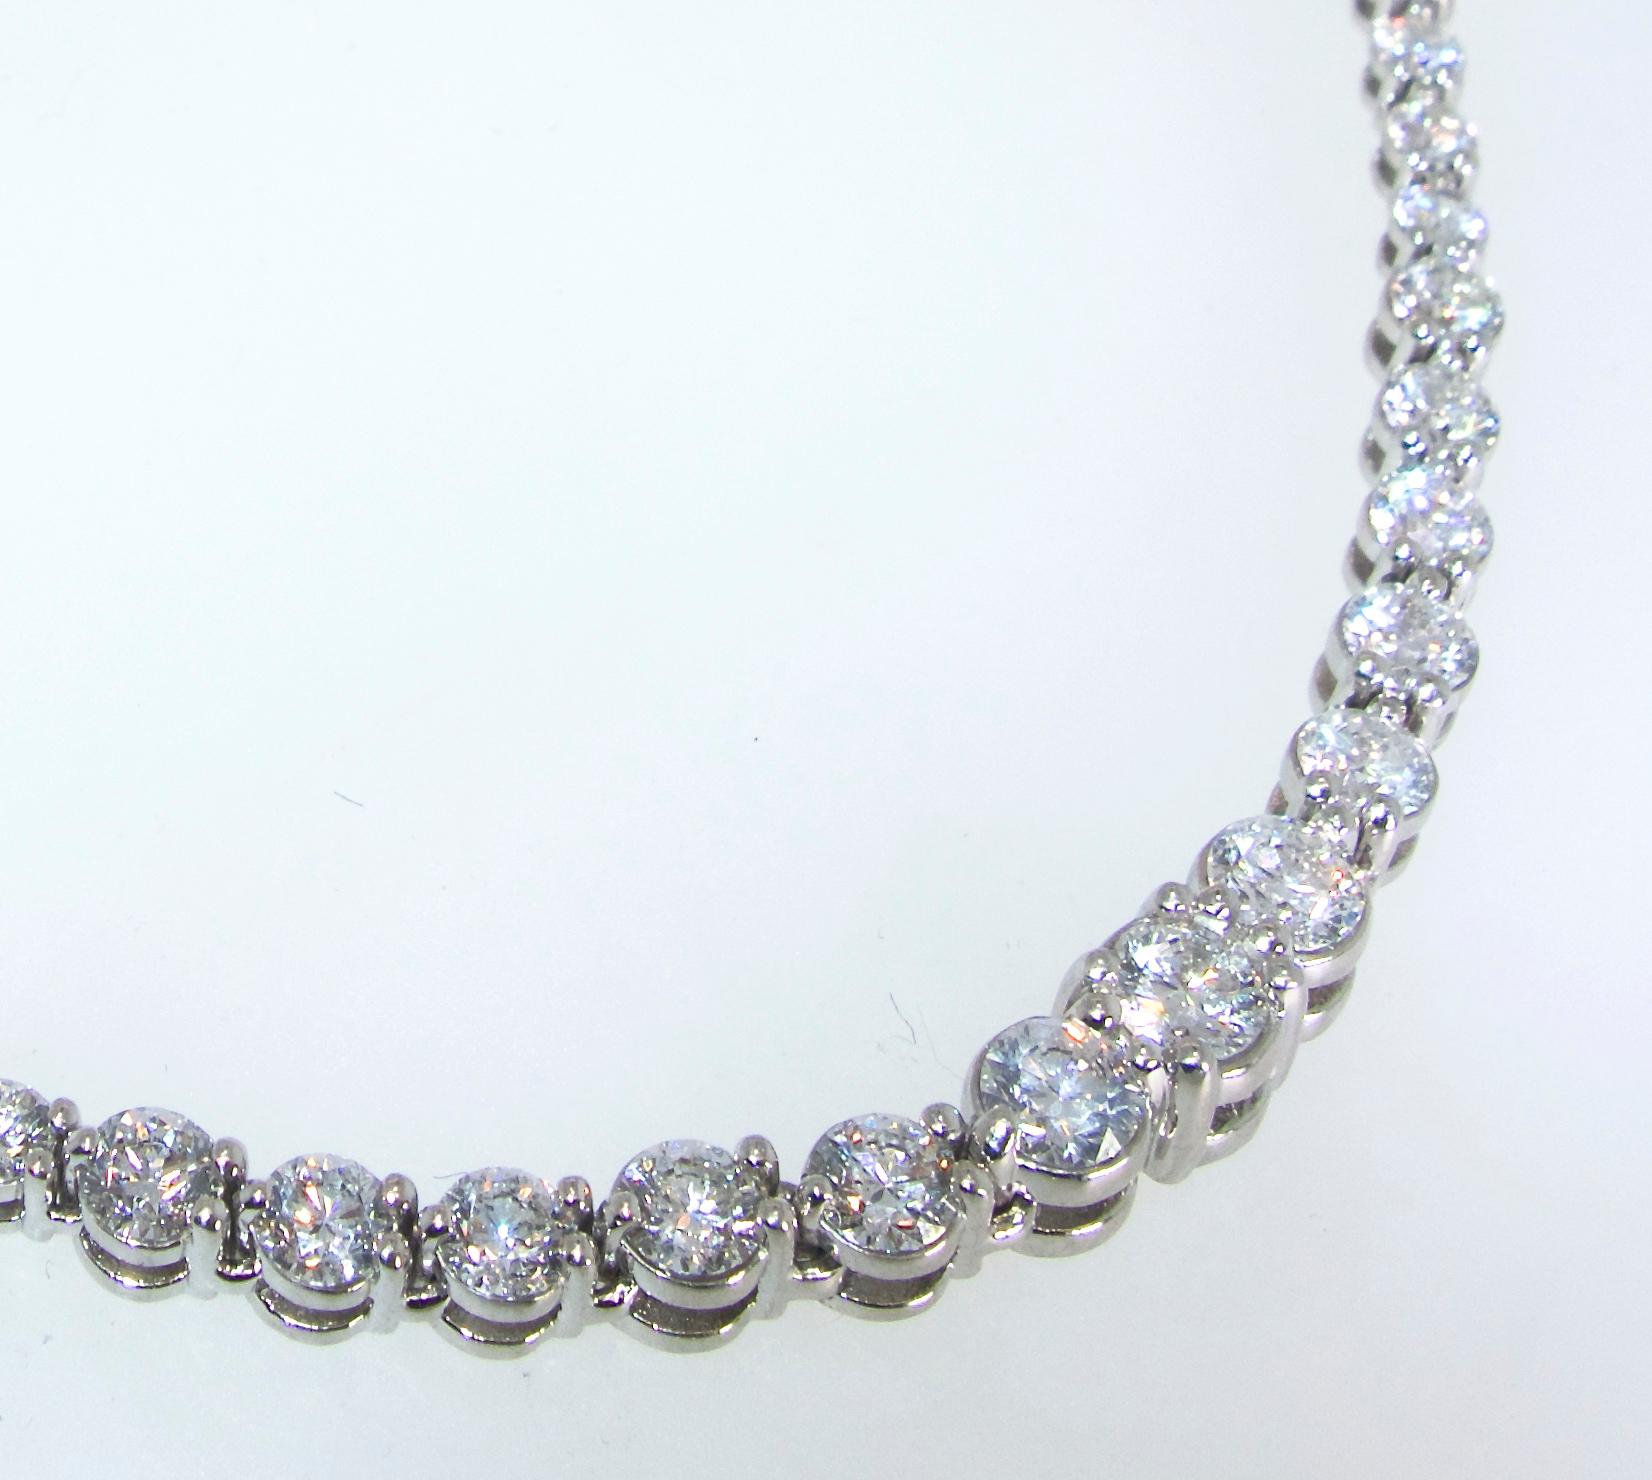 Platinum diamond Riviere necklace possessing well matched, well cut, fine diamonds totaling approximately 13 cts.  These 89 brilliant cut diamonds, ranging in size from .15 cts. up to .45 cts.,  are all near colorless (H) and very slightly included